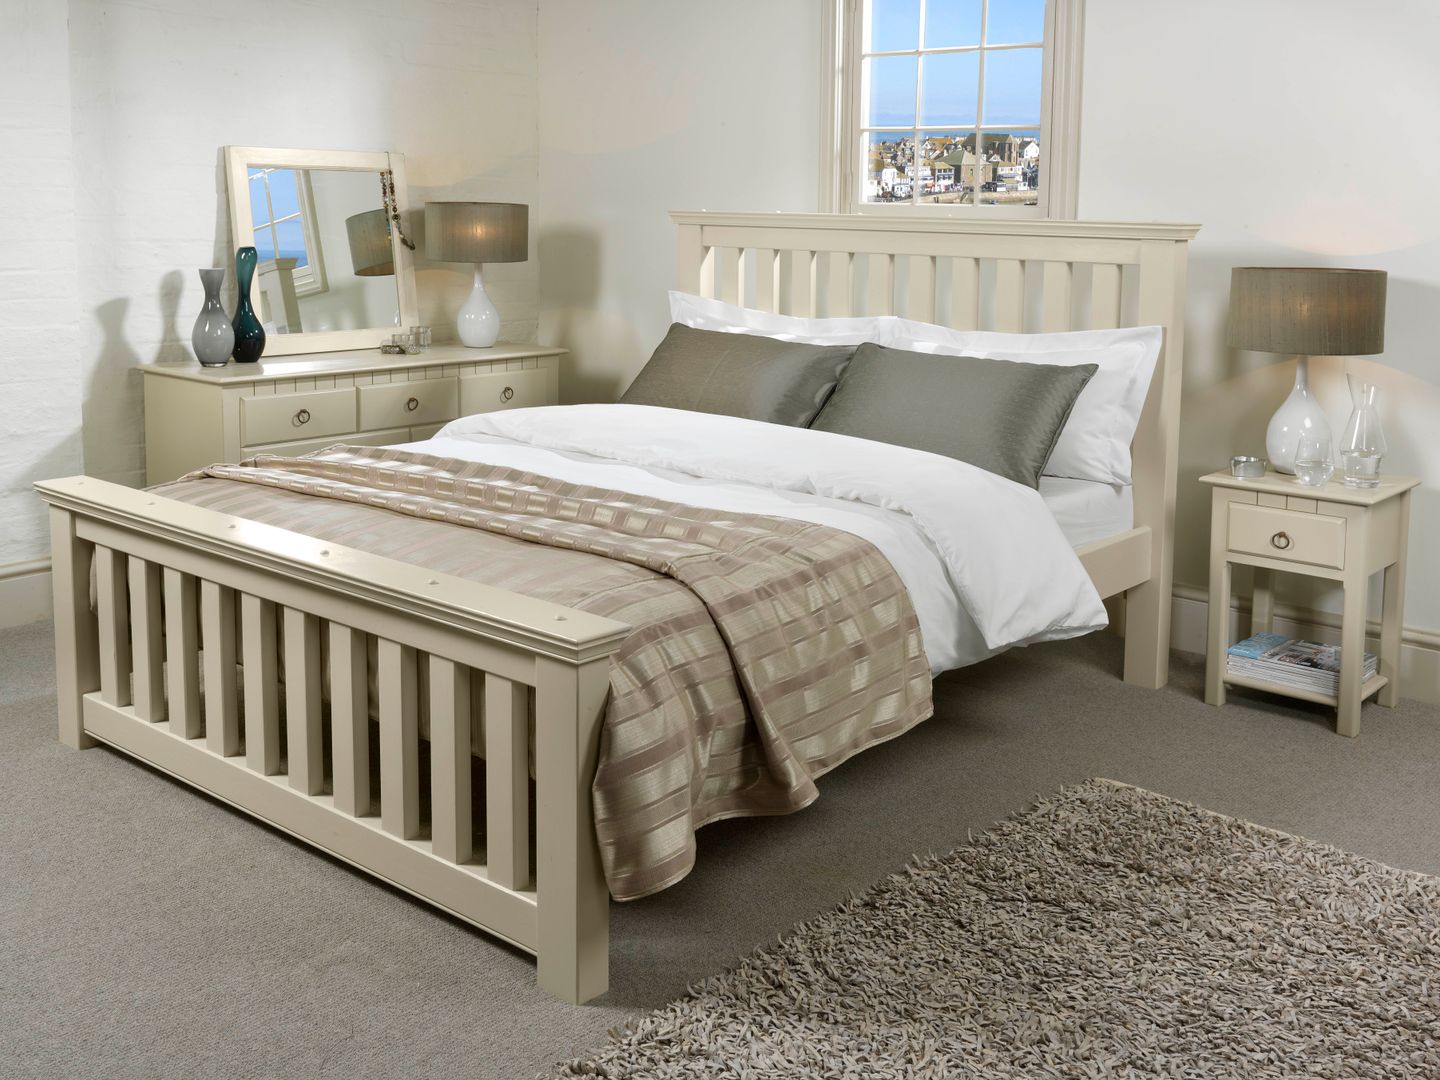 The Maine New England Bed Revival Beds Modern Bedroom Beds & headboards